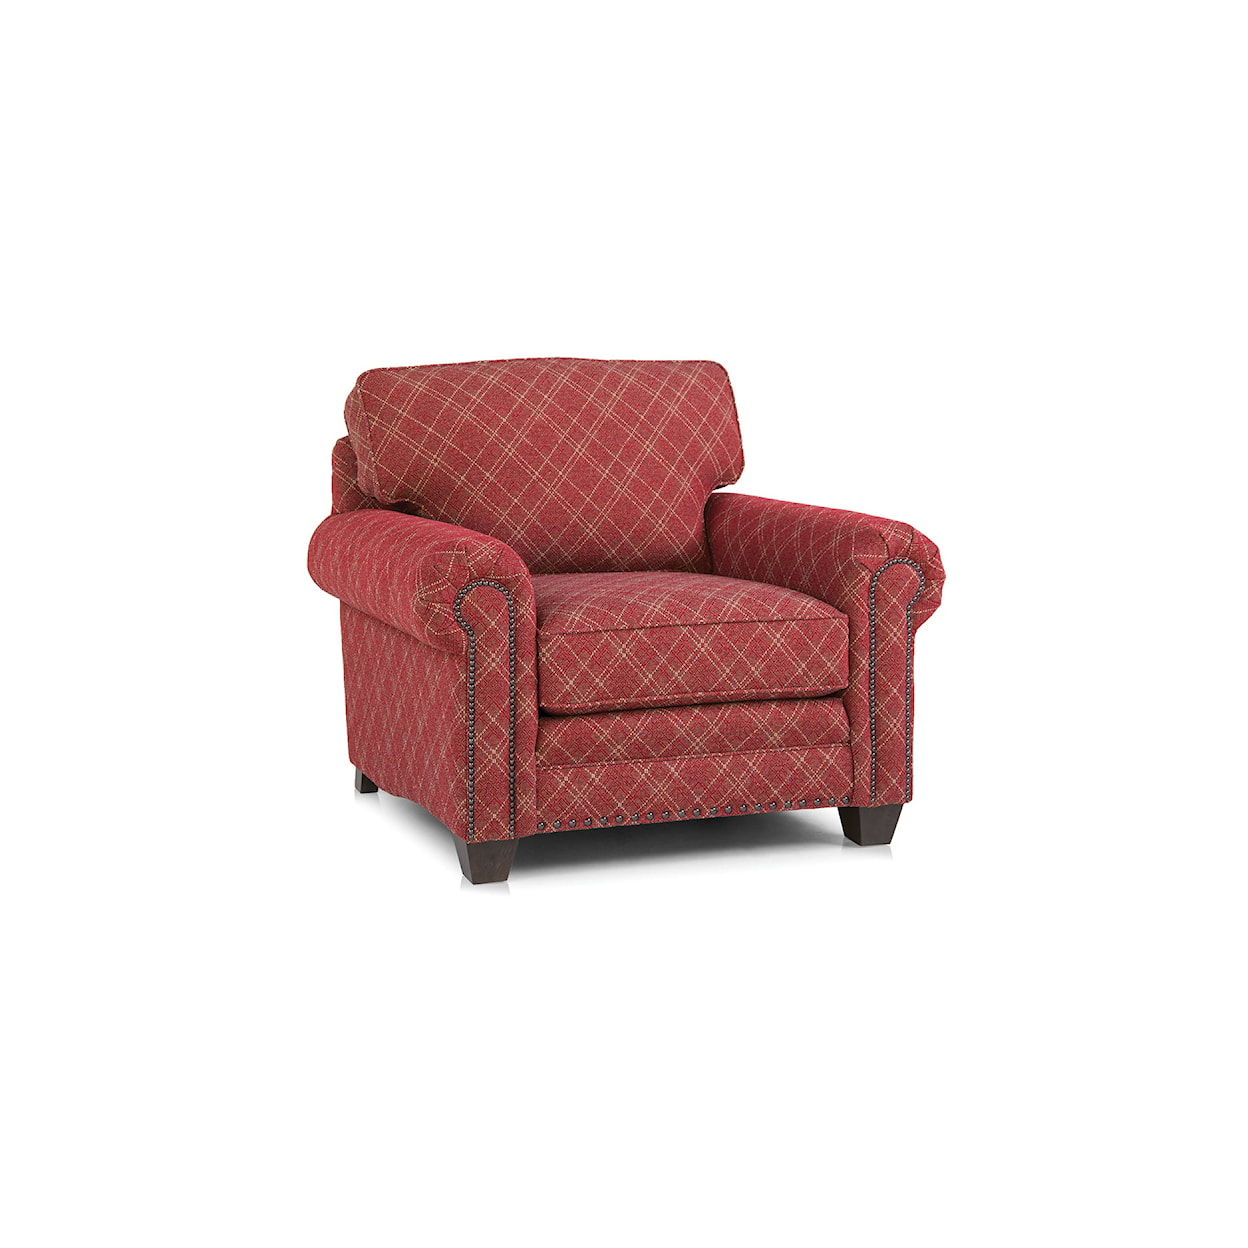 Smith Brothers 235 Chair with Nailhead Trim